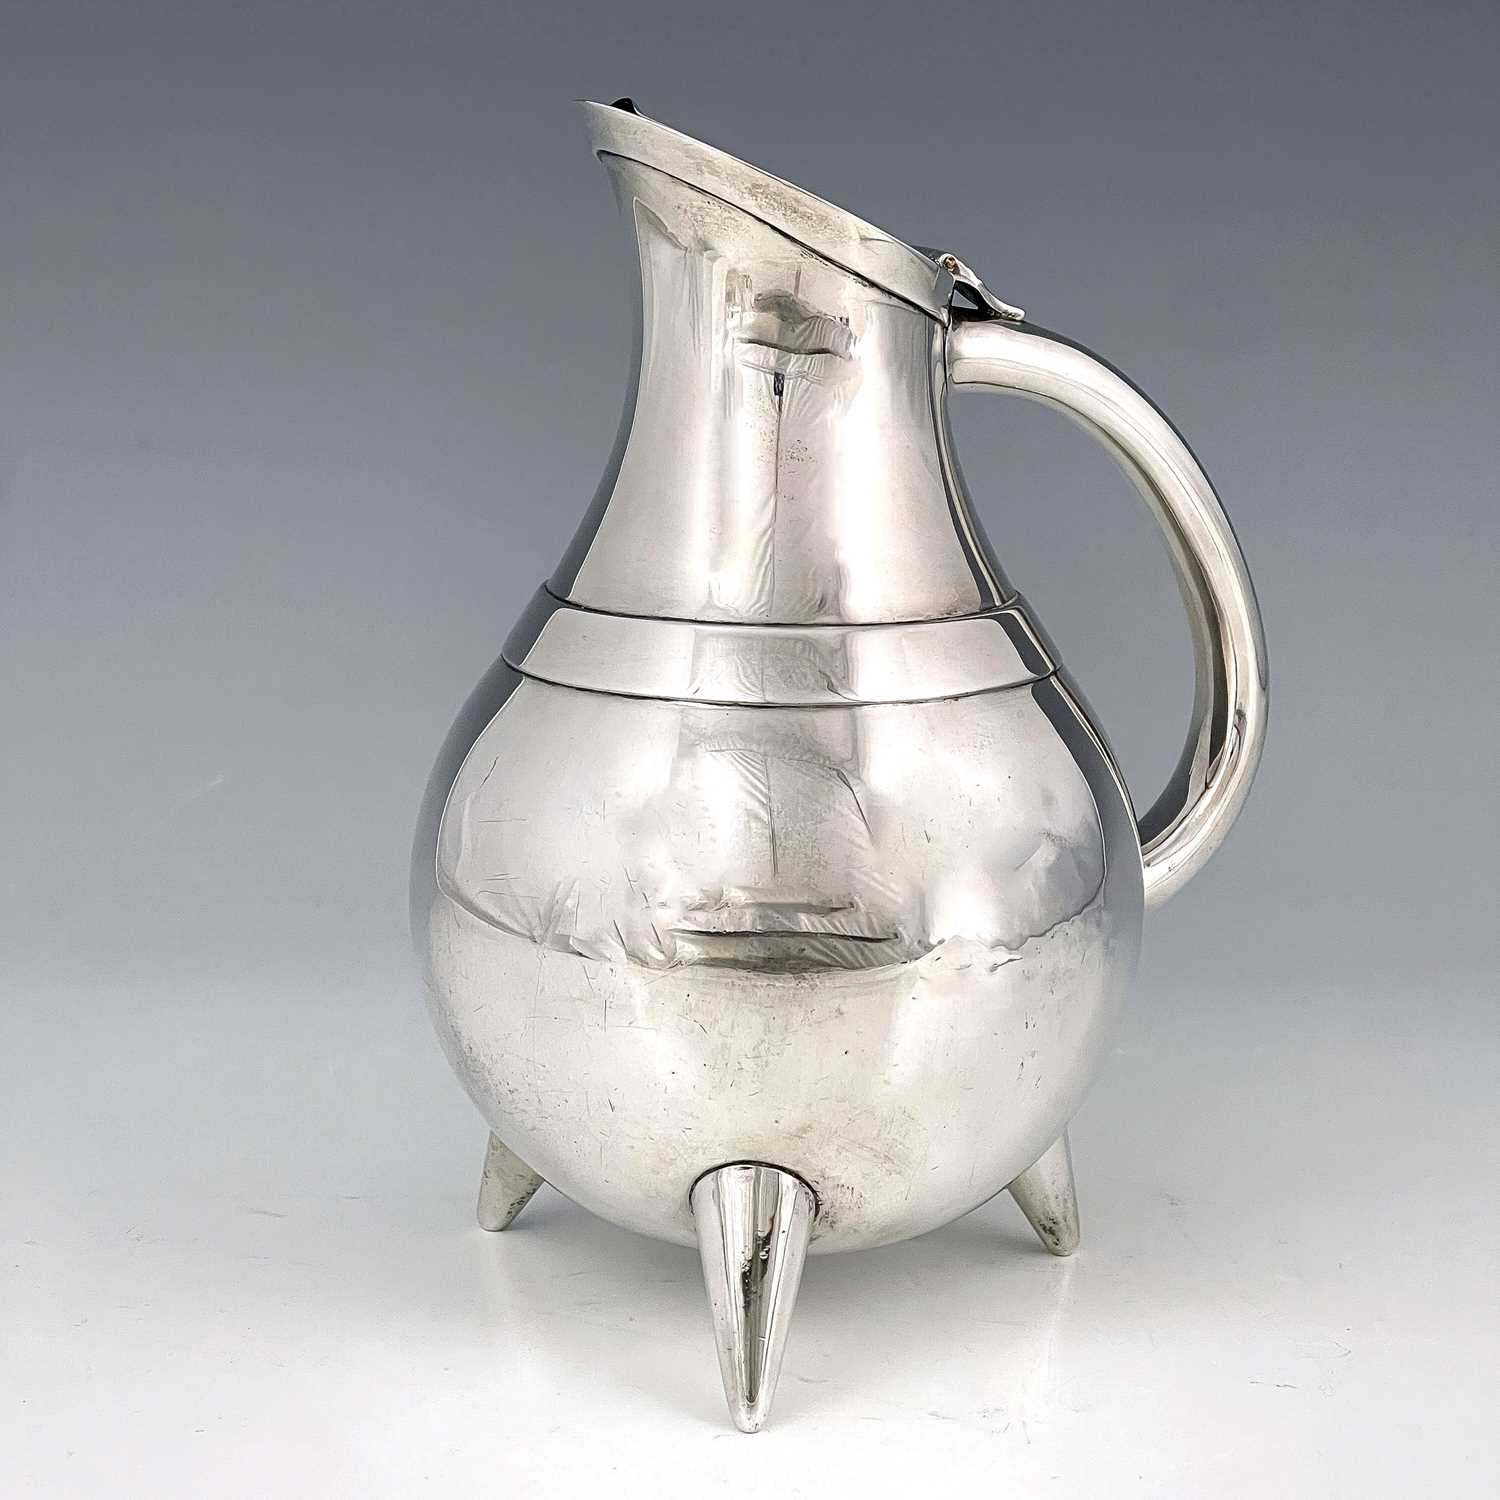 Christopher Dresser (attributed), an Aesthetic Movement silver claret jug, Mappin and Webb, London